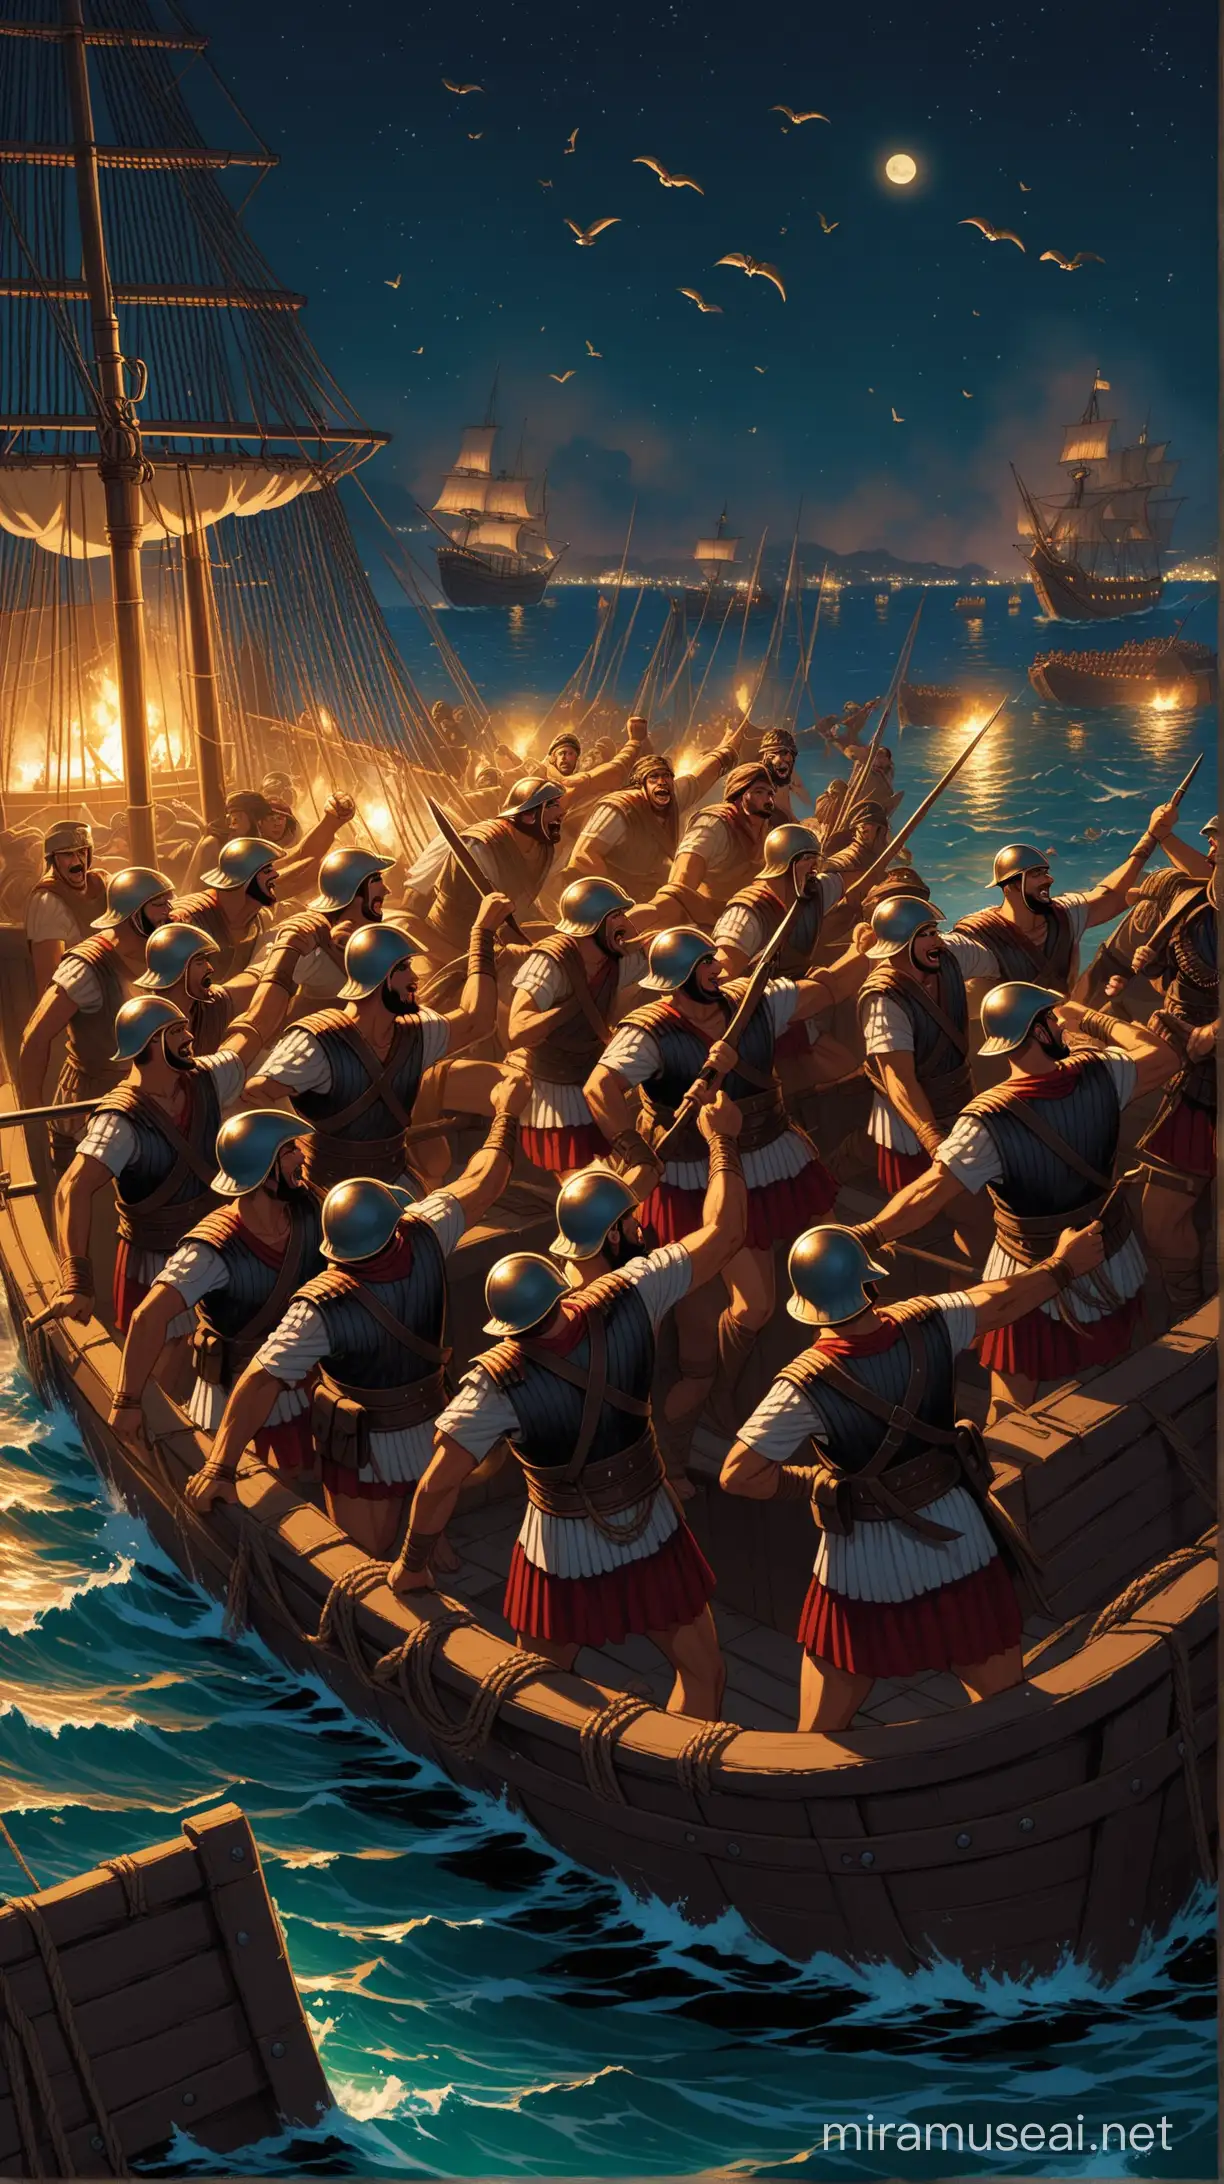 Roman sailor soilders emerge victorious against the pirates and captures them in the night
